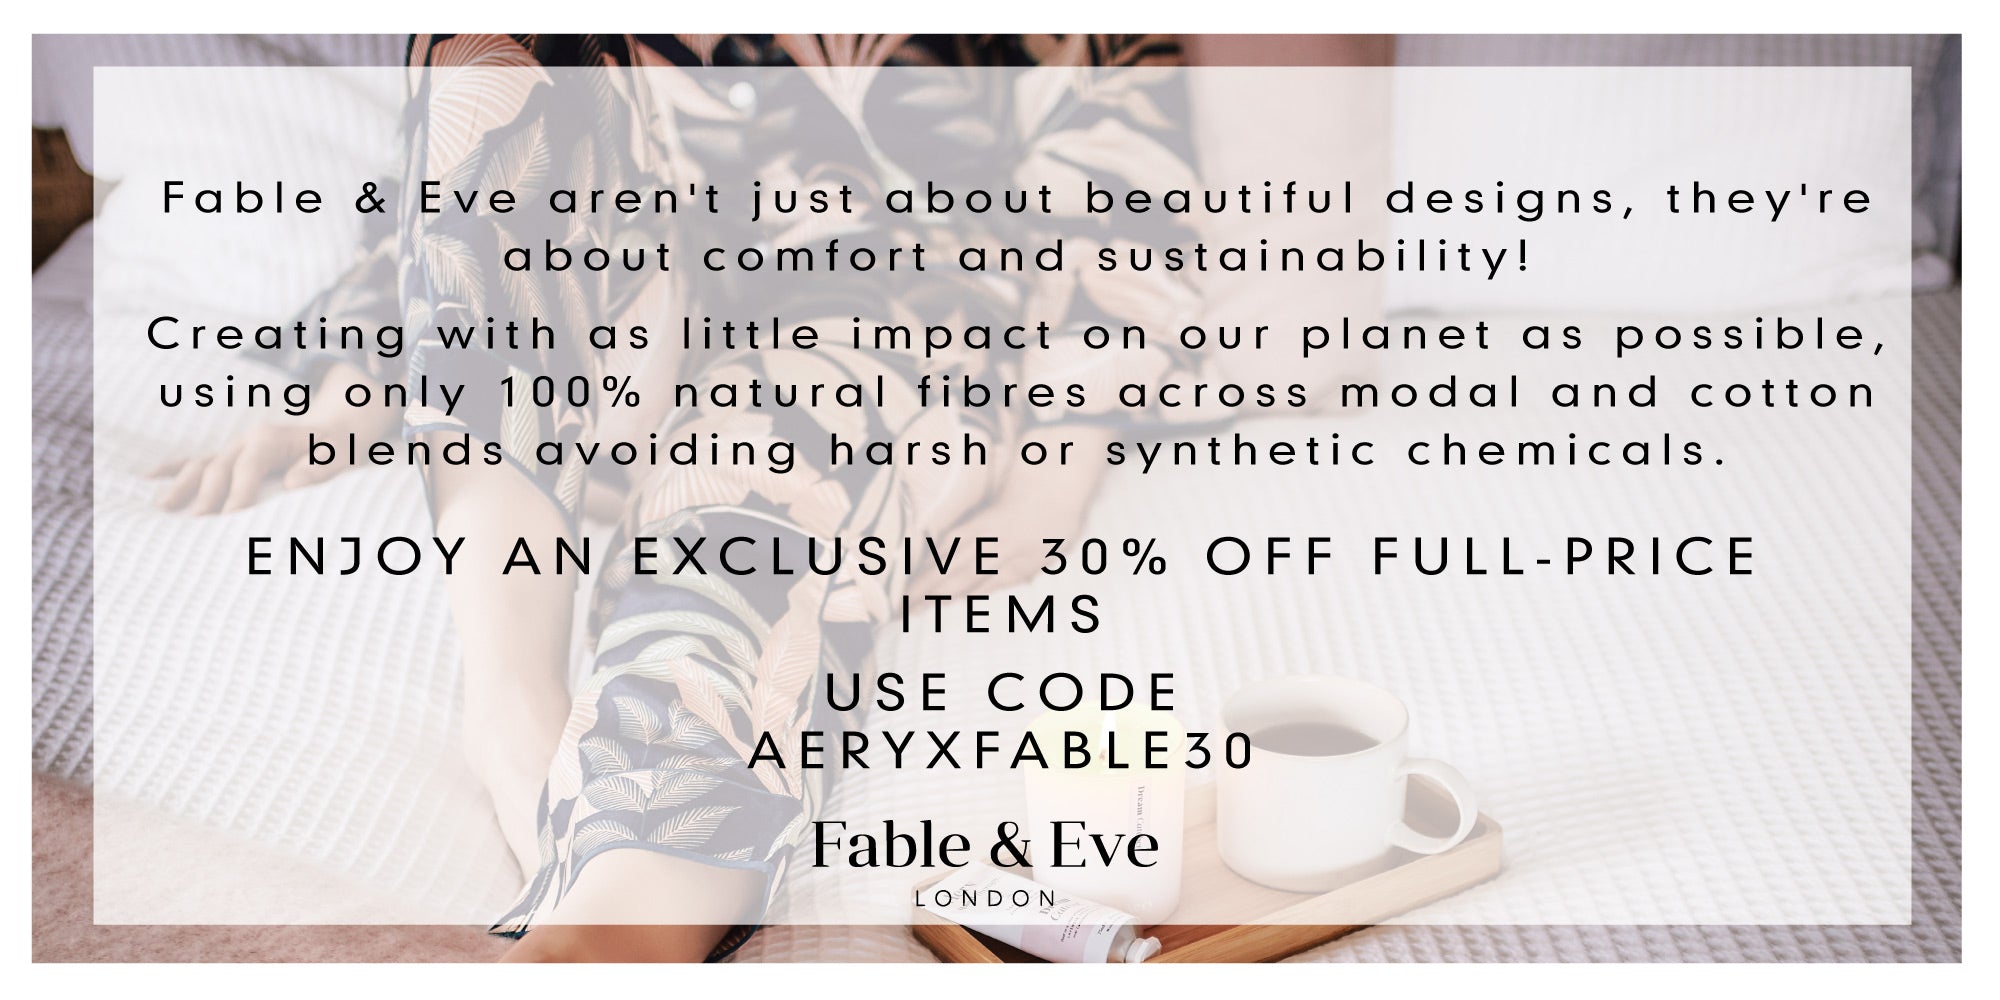 exlusive aery and fable and eve offer. Shop 30% off fable and eve with code AERYXFABLE30